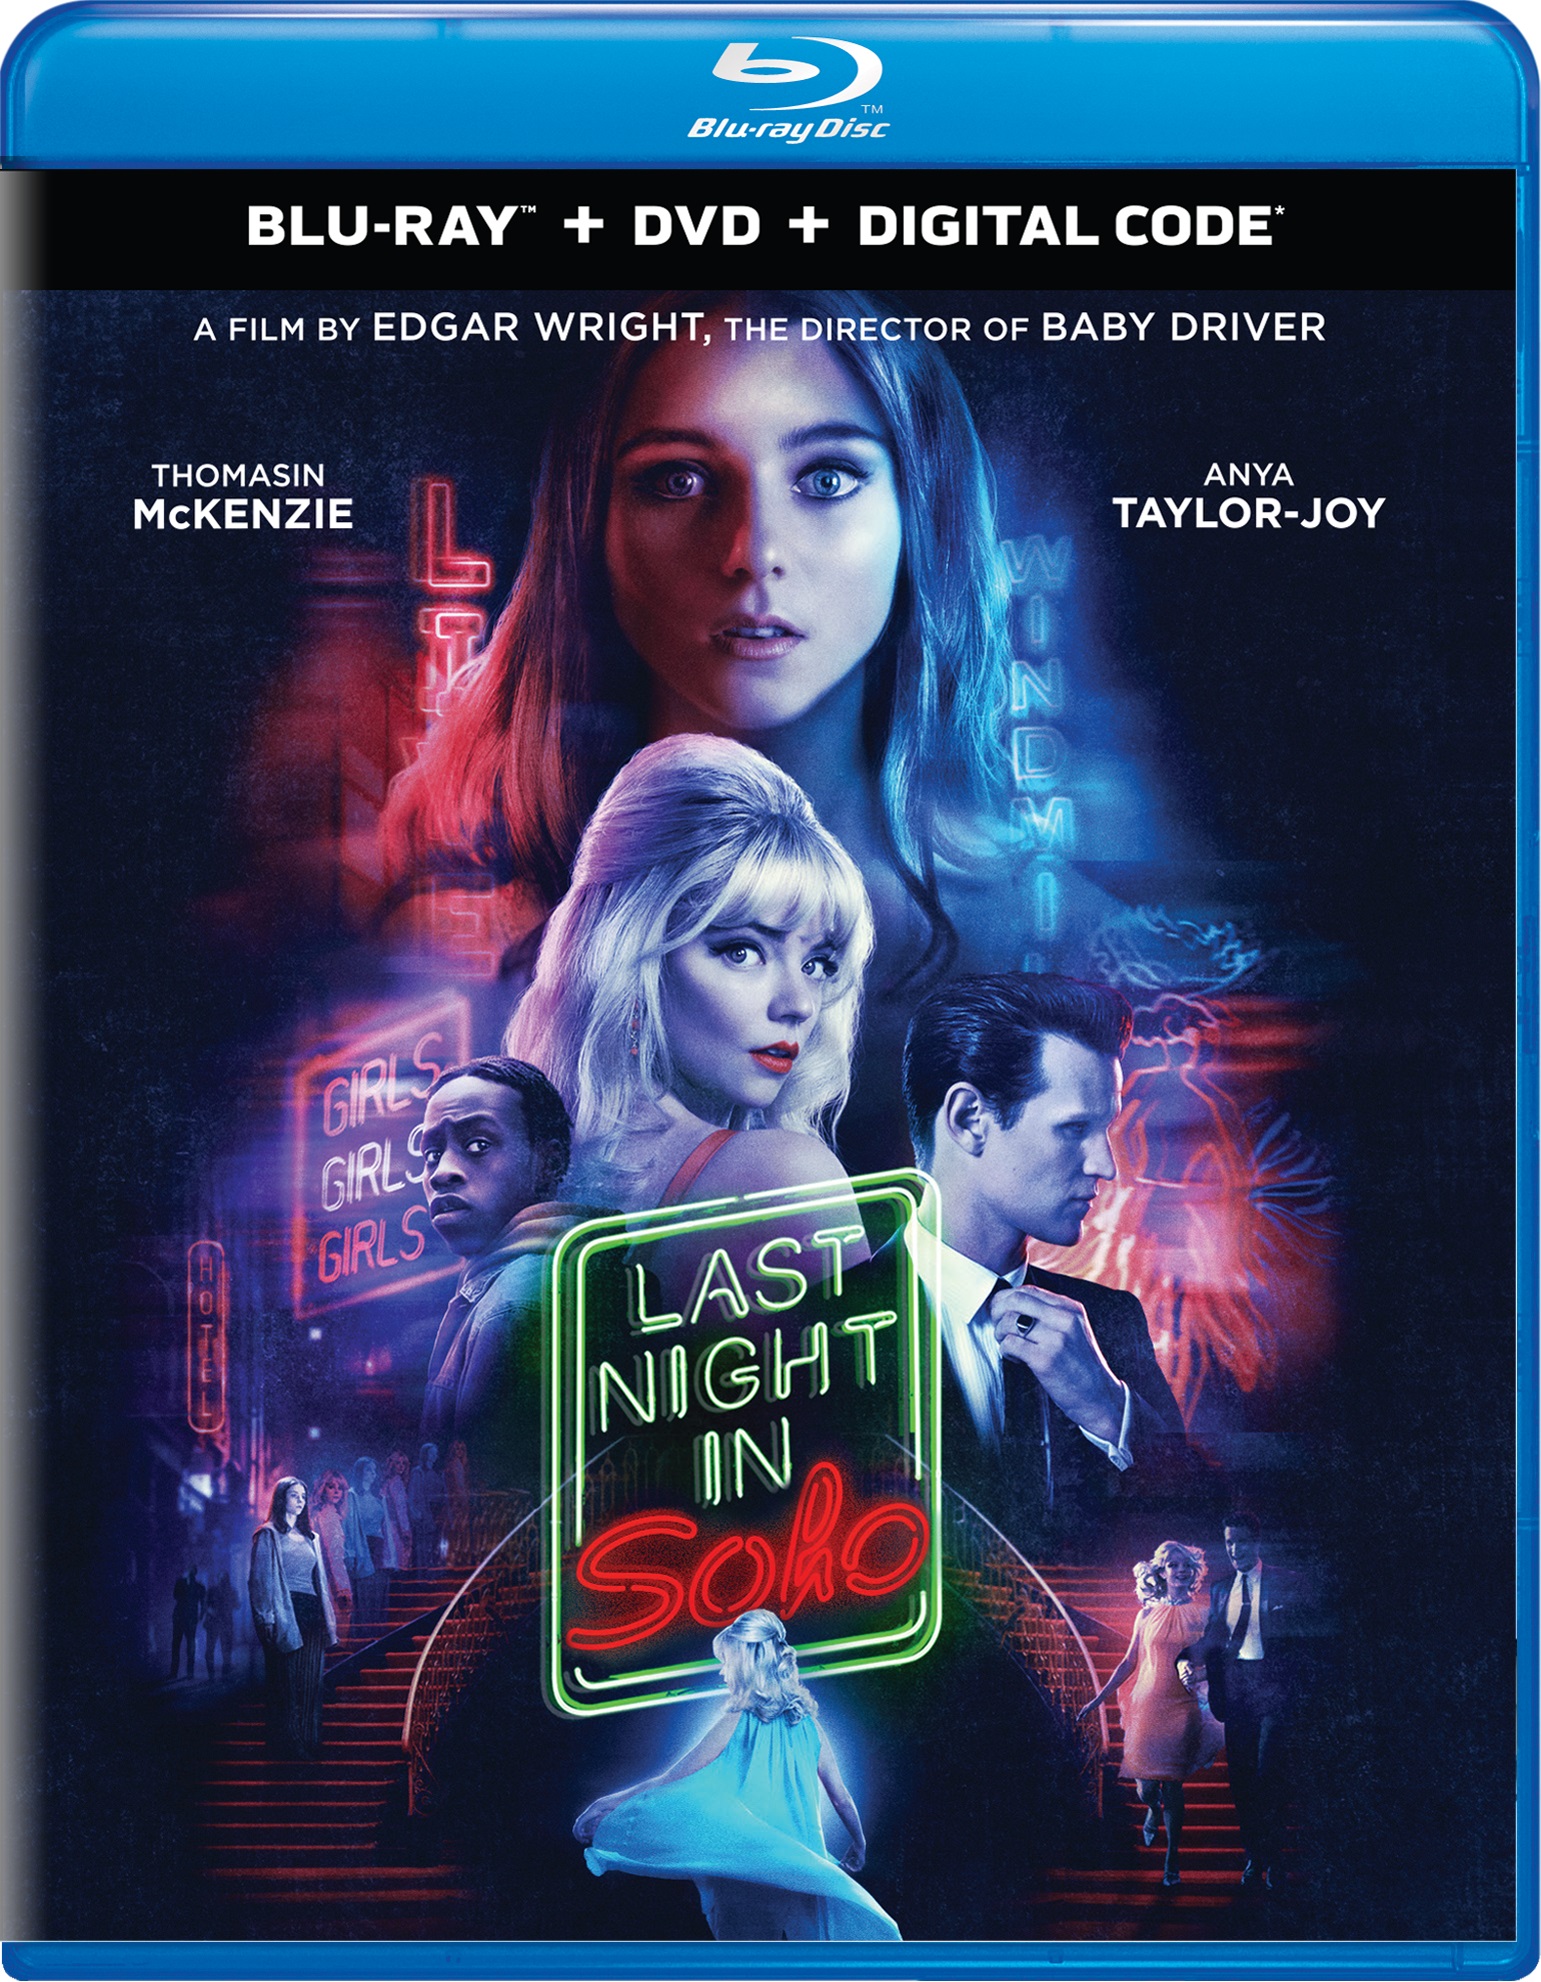 Last Night In Soho (with DVD) - Blu-ray [ 2021 ]  - Horror Movies On Blu-ray - Movies On GRUV